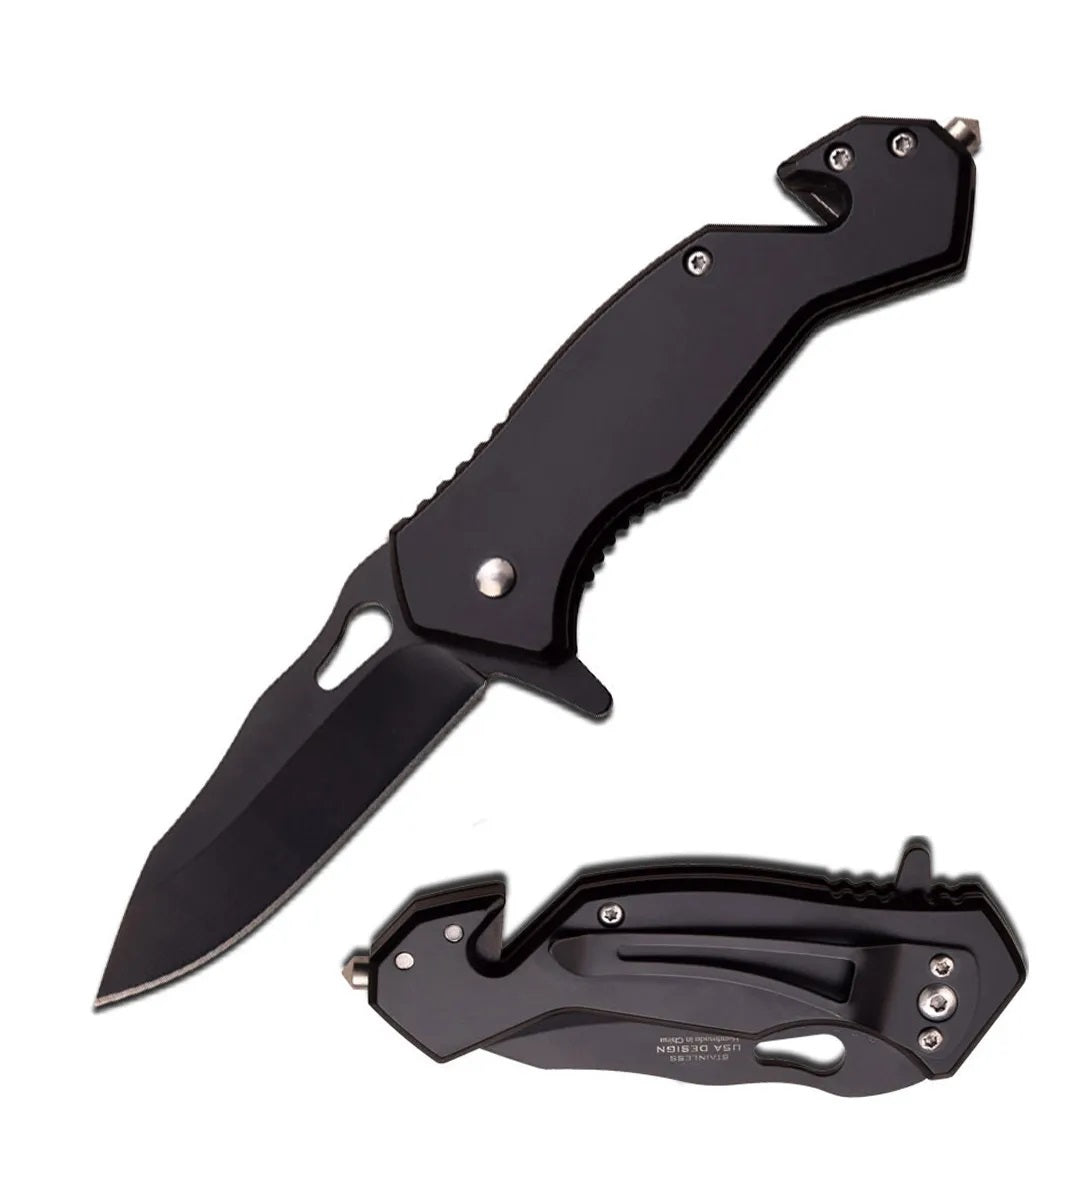 3.75" Closed Spring Assisted Knife